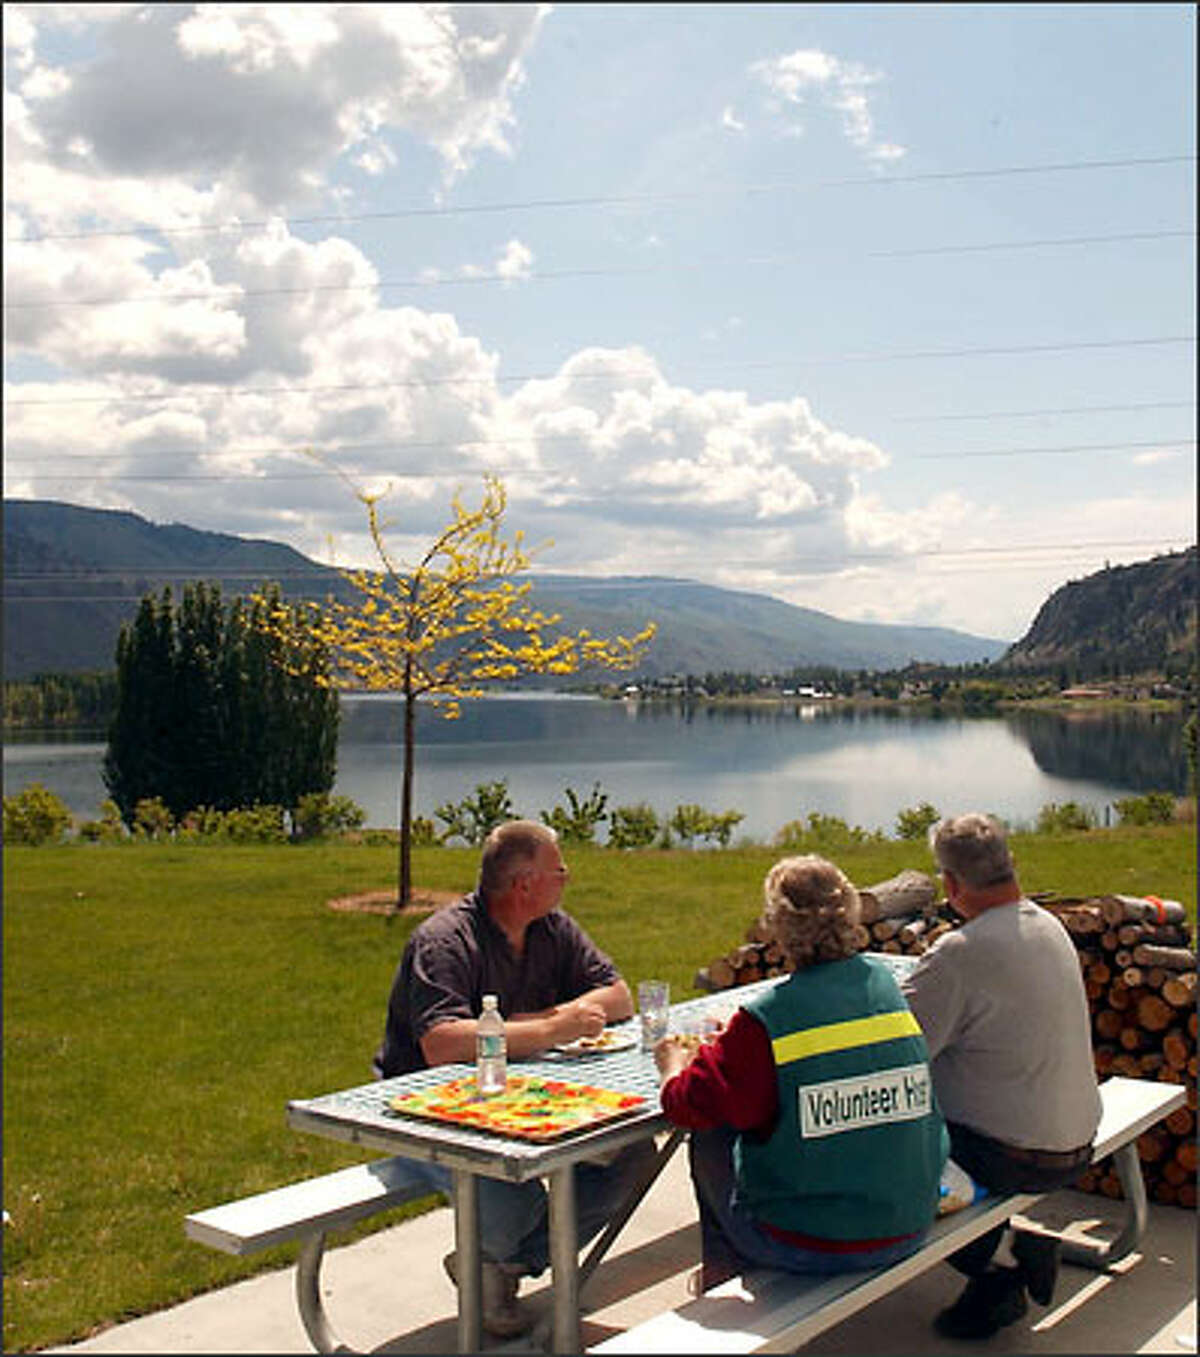 Camp hosts Ken and Karen Bauer, right, and Karen's brother, Ed Wendt, all from Wenatchee, survey the sunny scene at Daroga State Park.